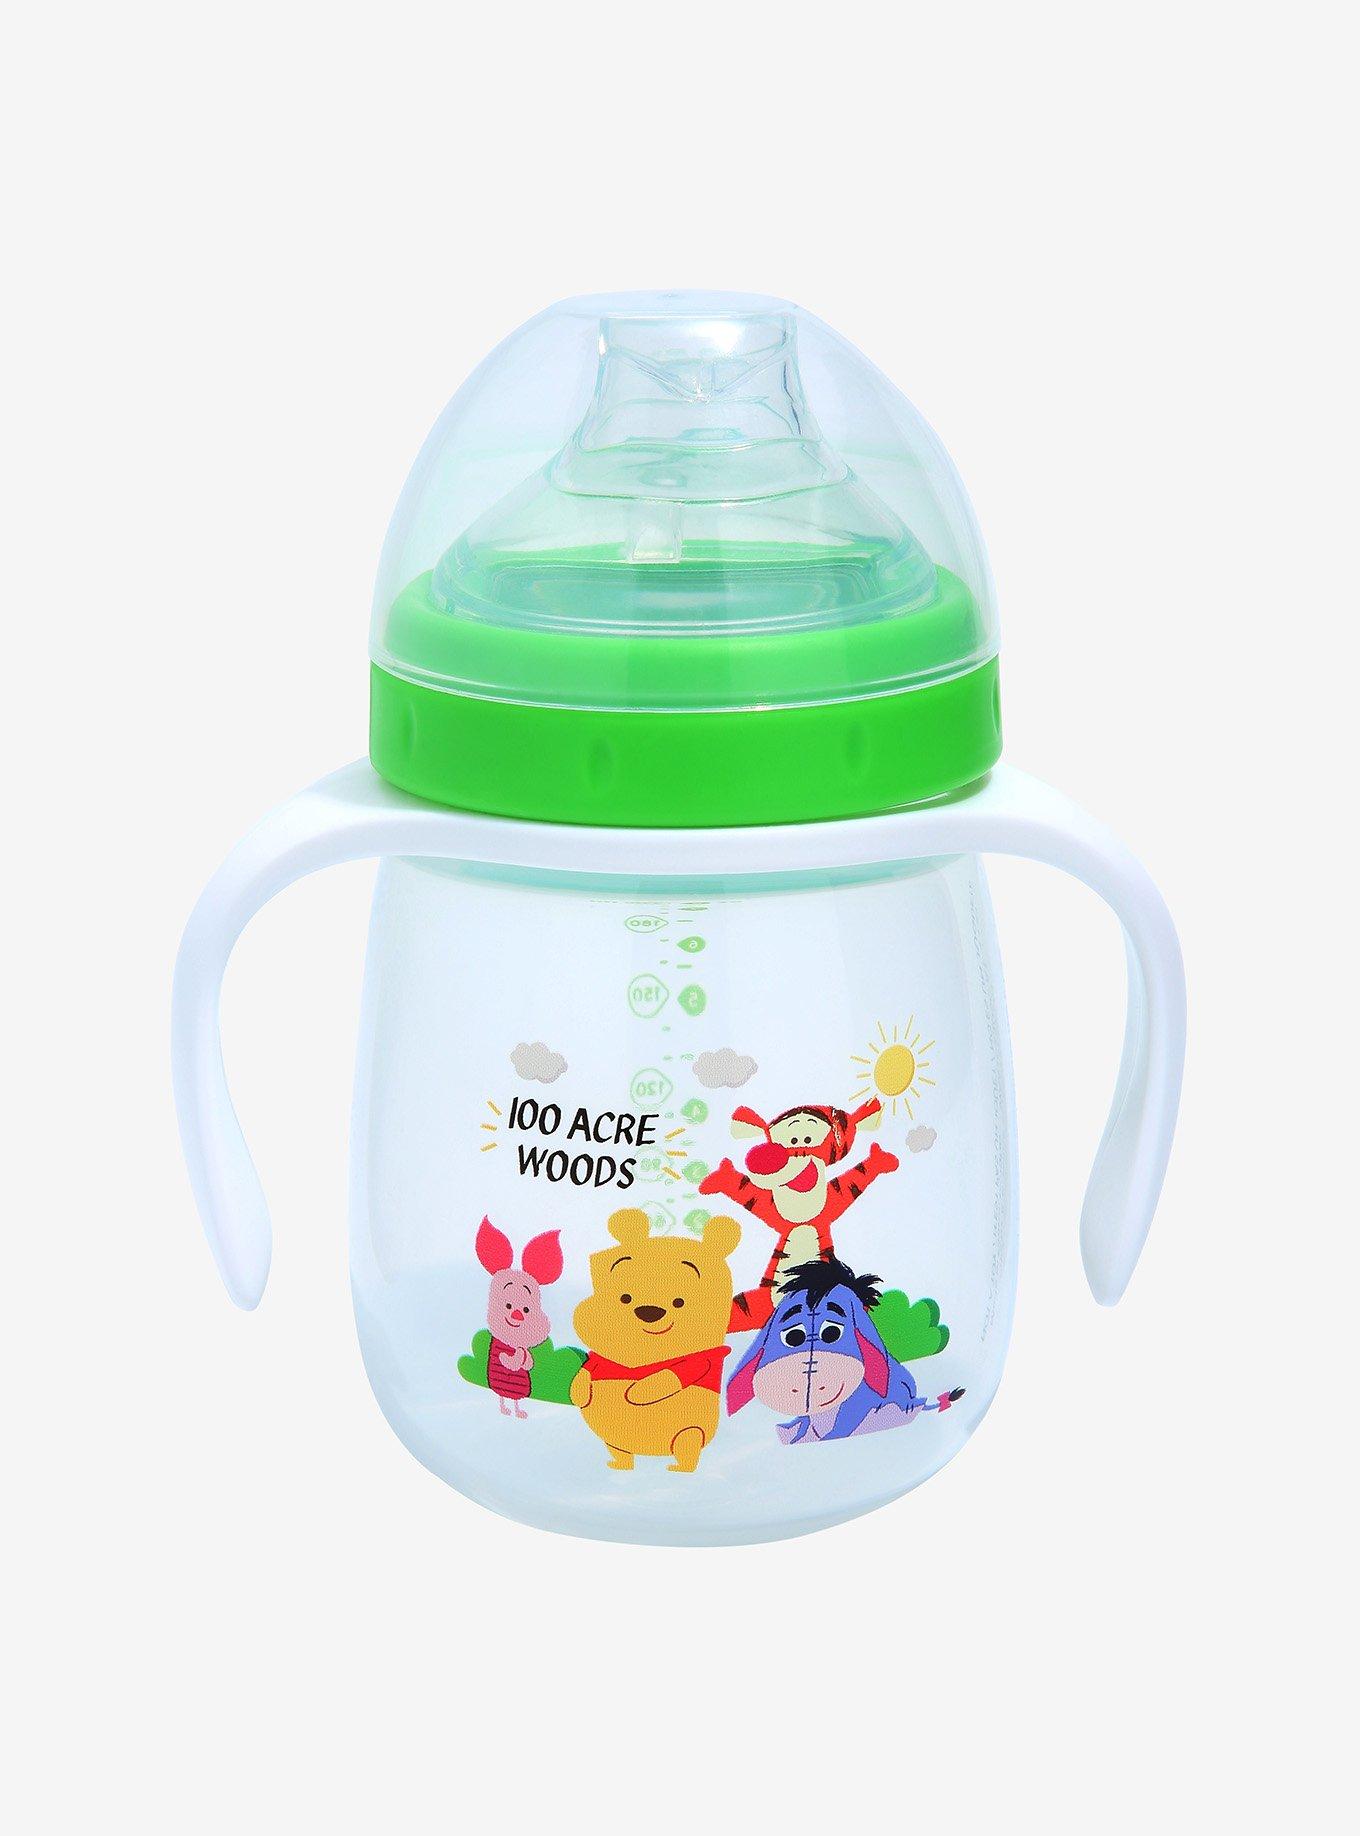 Disney Winnie the Pooh 100 Acre Woods Sippy Cup BoxLunch Exclusive | BoxLunch